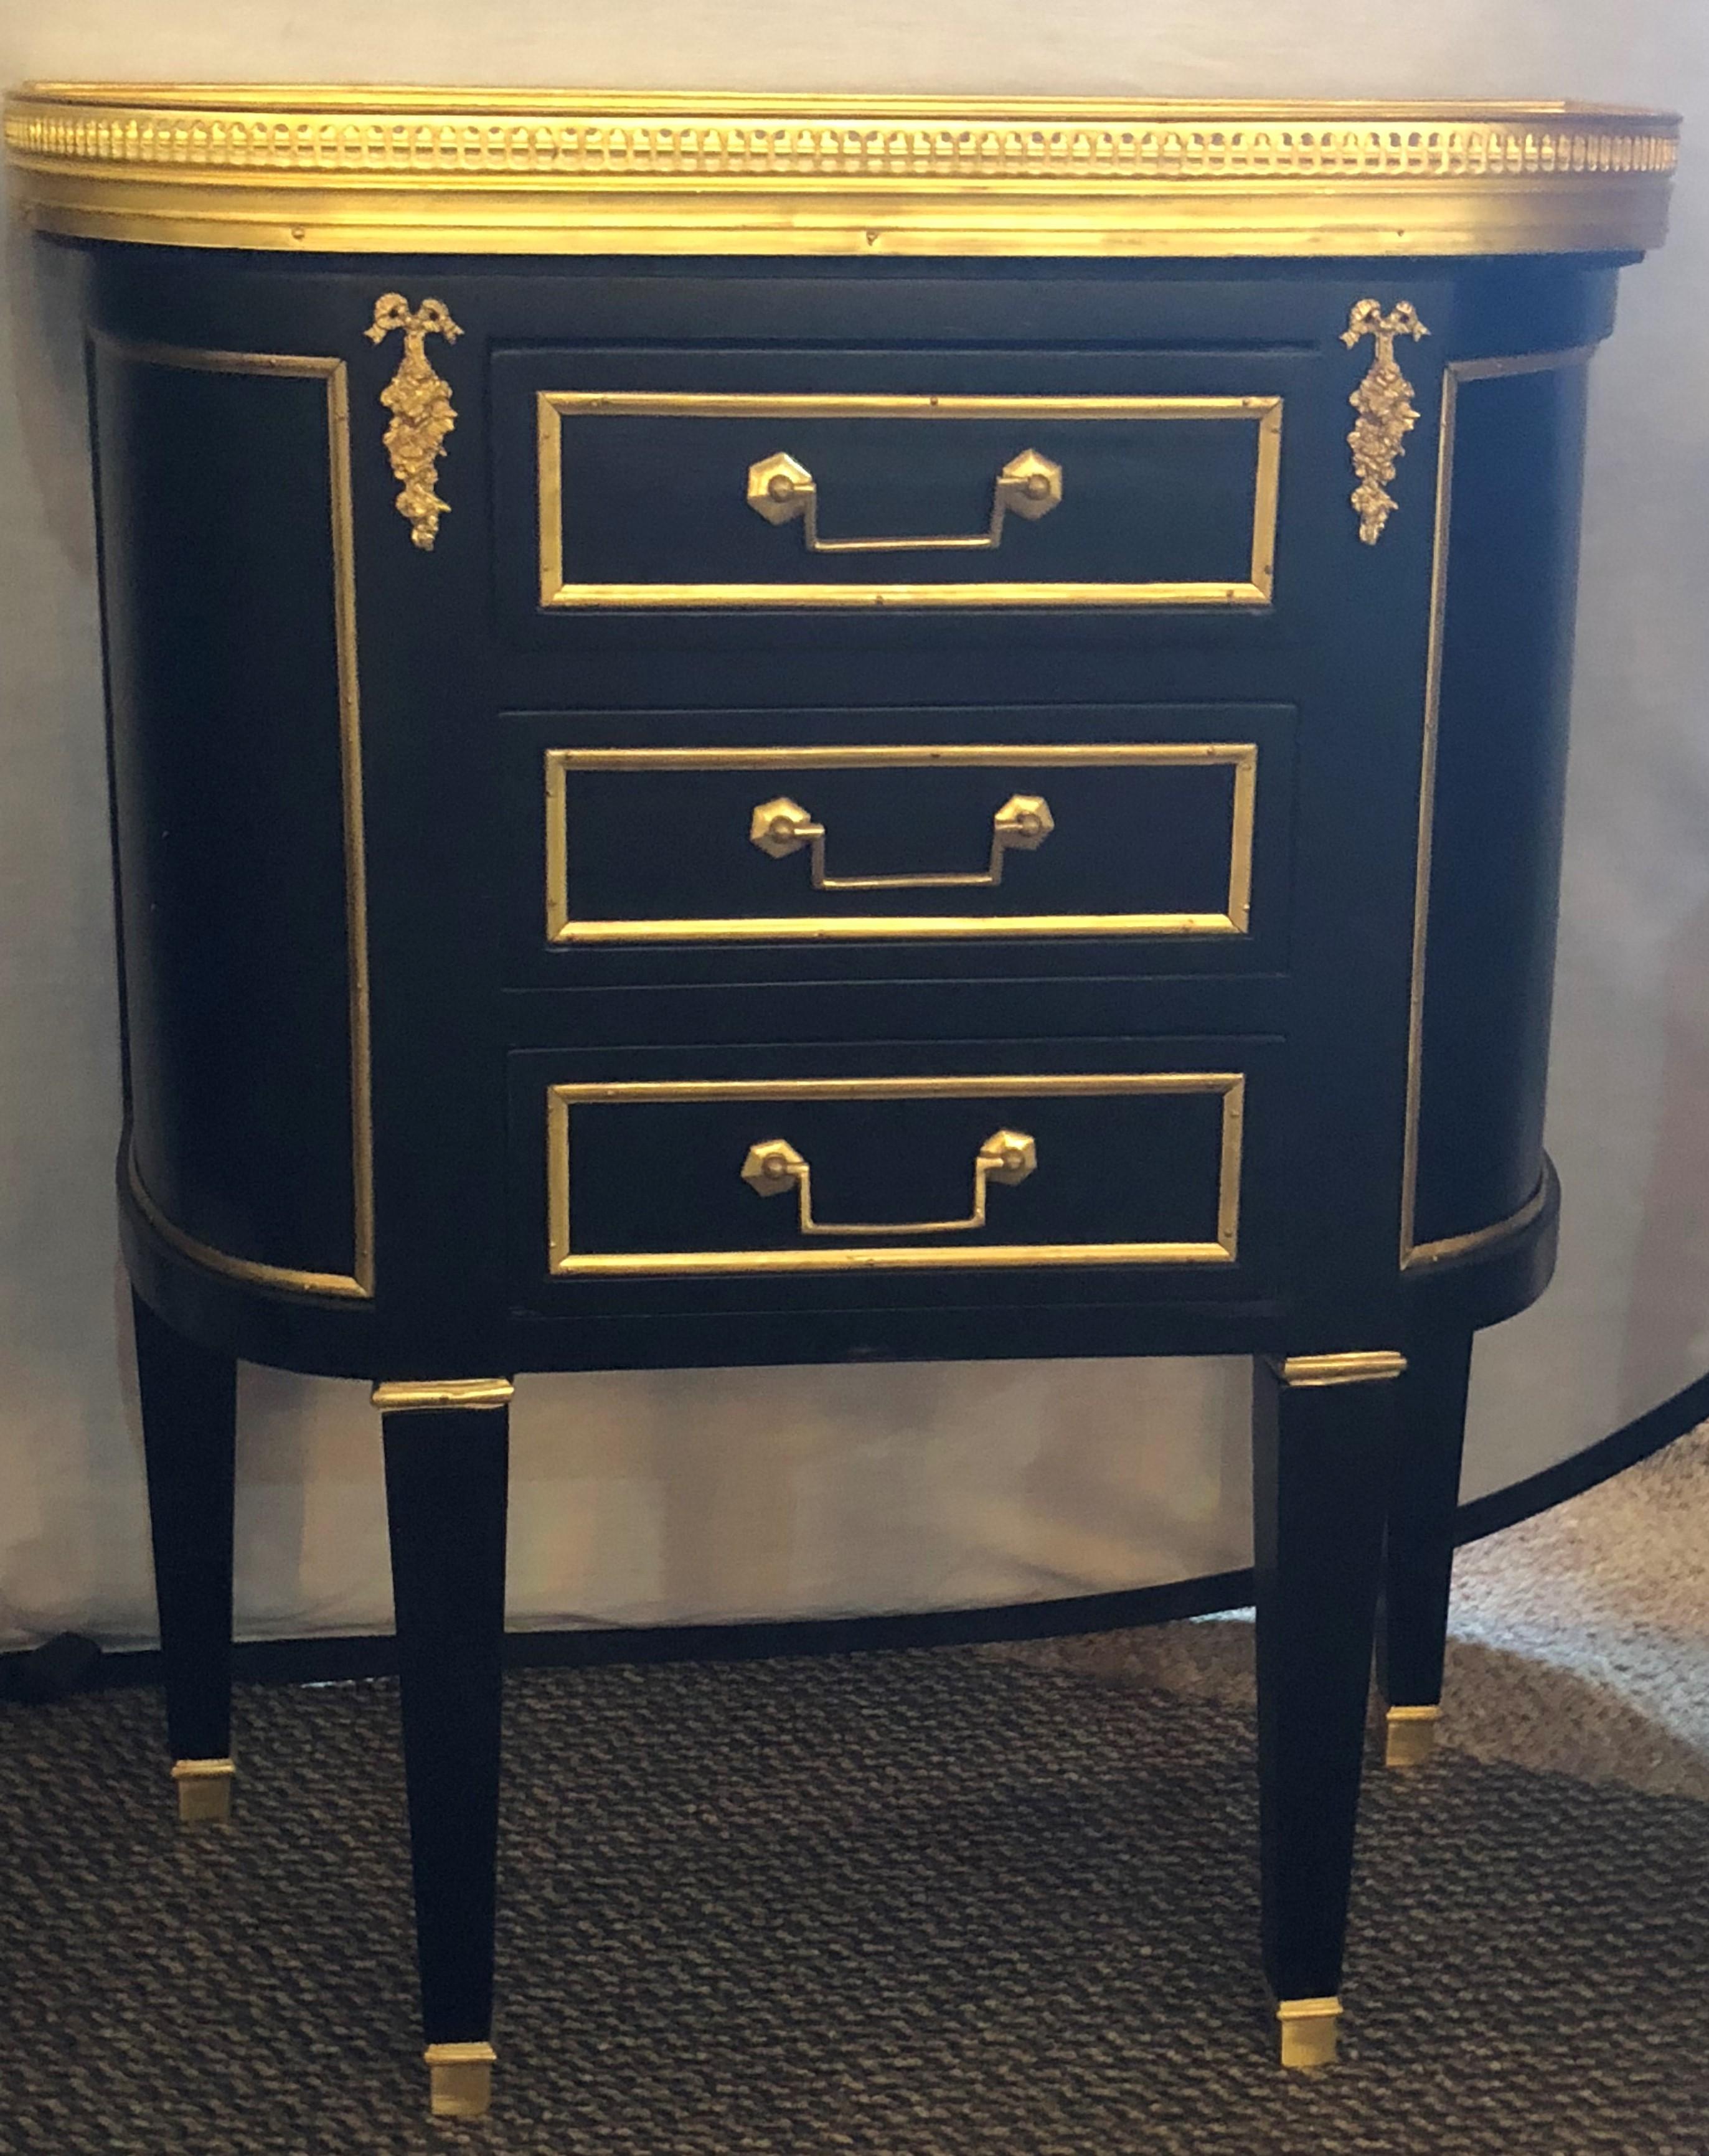 Pair of Jansen inspired marble-top galleried ebonized end tables with three drawers. These Hollywood Regency end tables will shine next to any bed or sofa and can surely sit on their own in most room settings. The rounded sides and flat fronts are